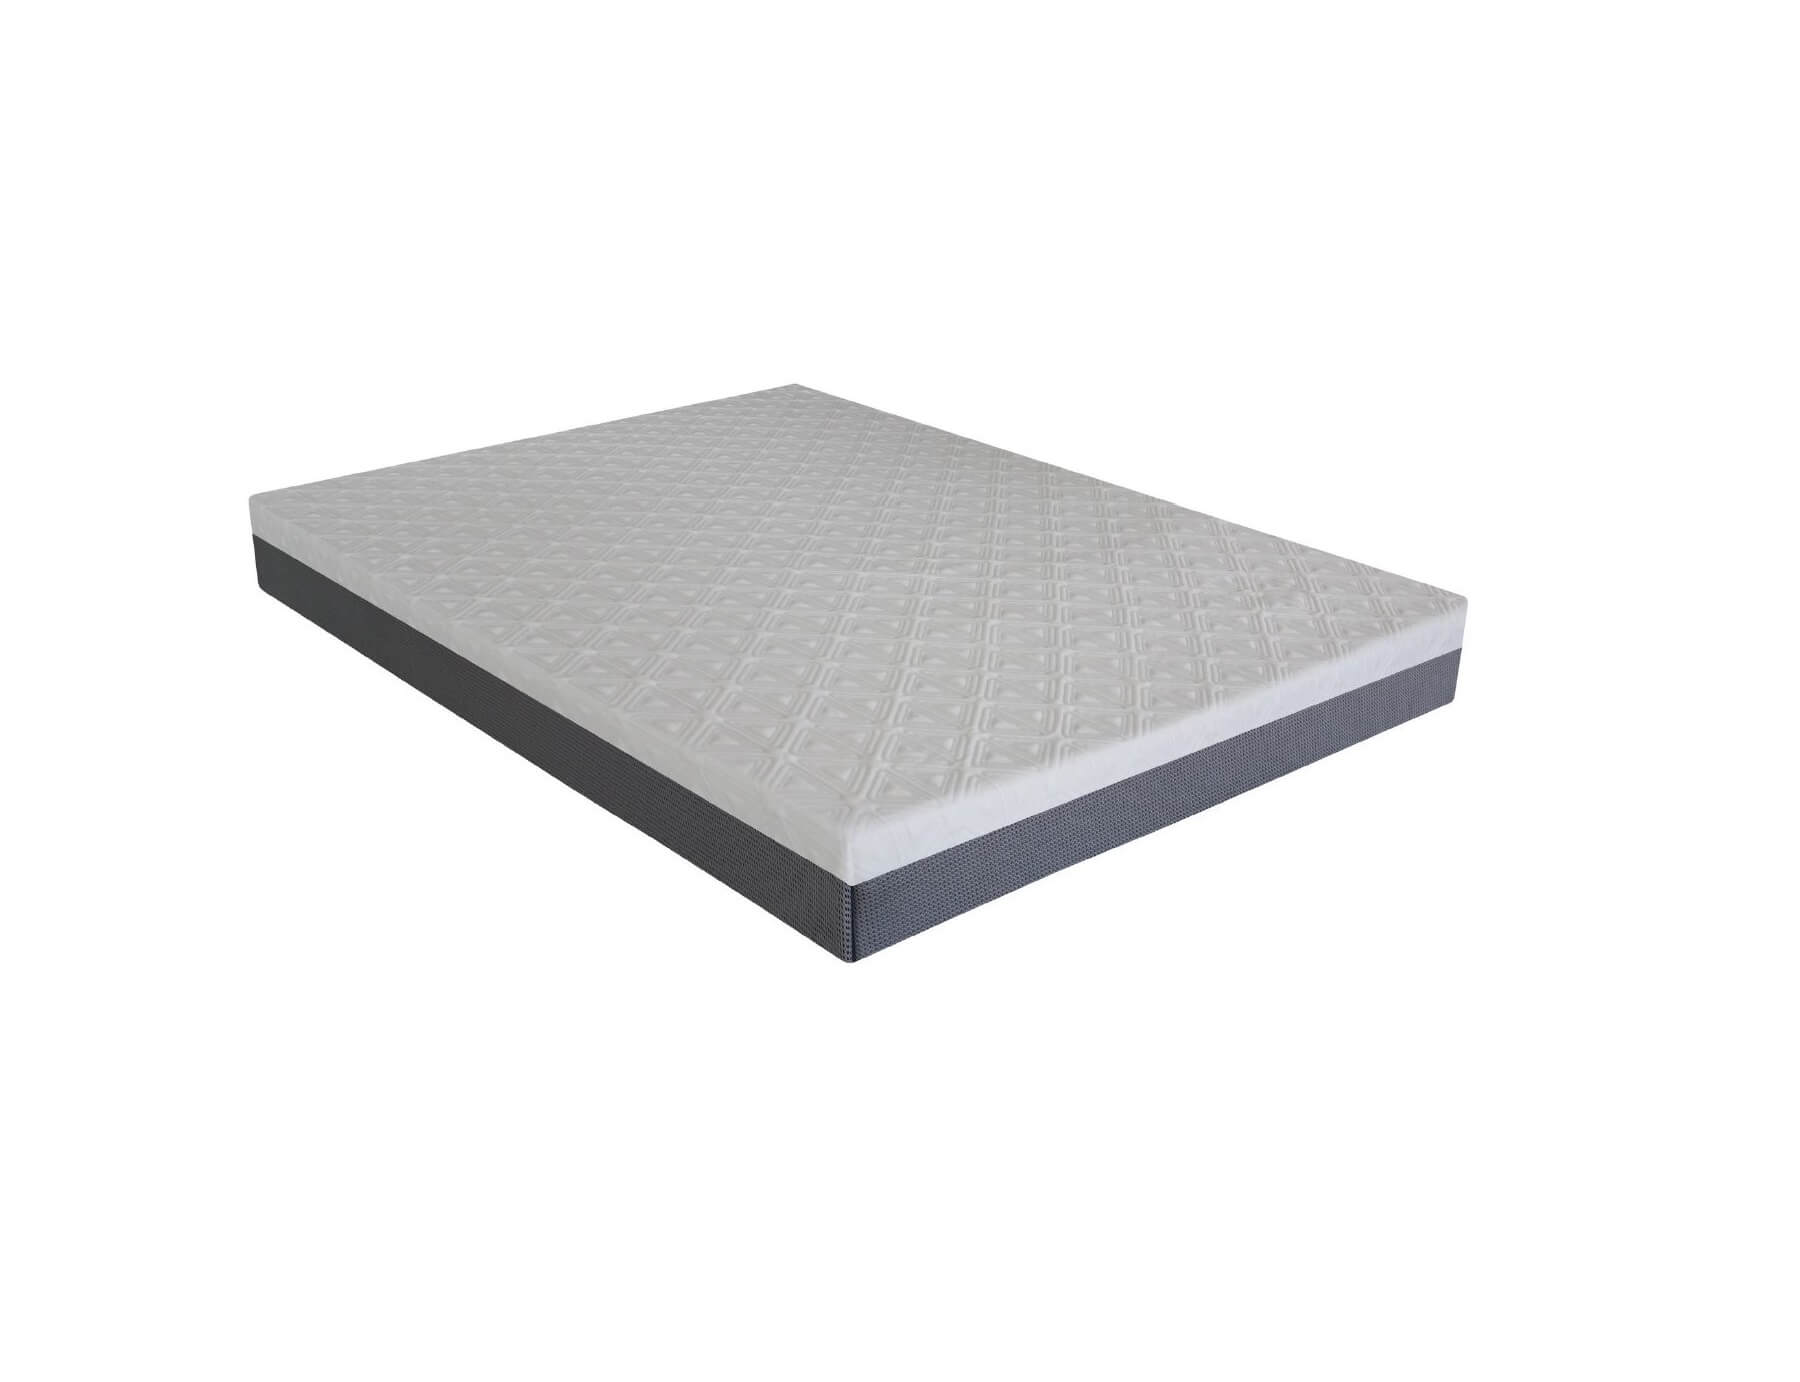 Comfort Concepts Chill Whispering Wind Firm Gel Memory Foam King Mattress